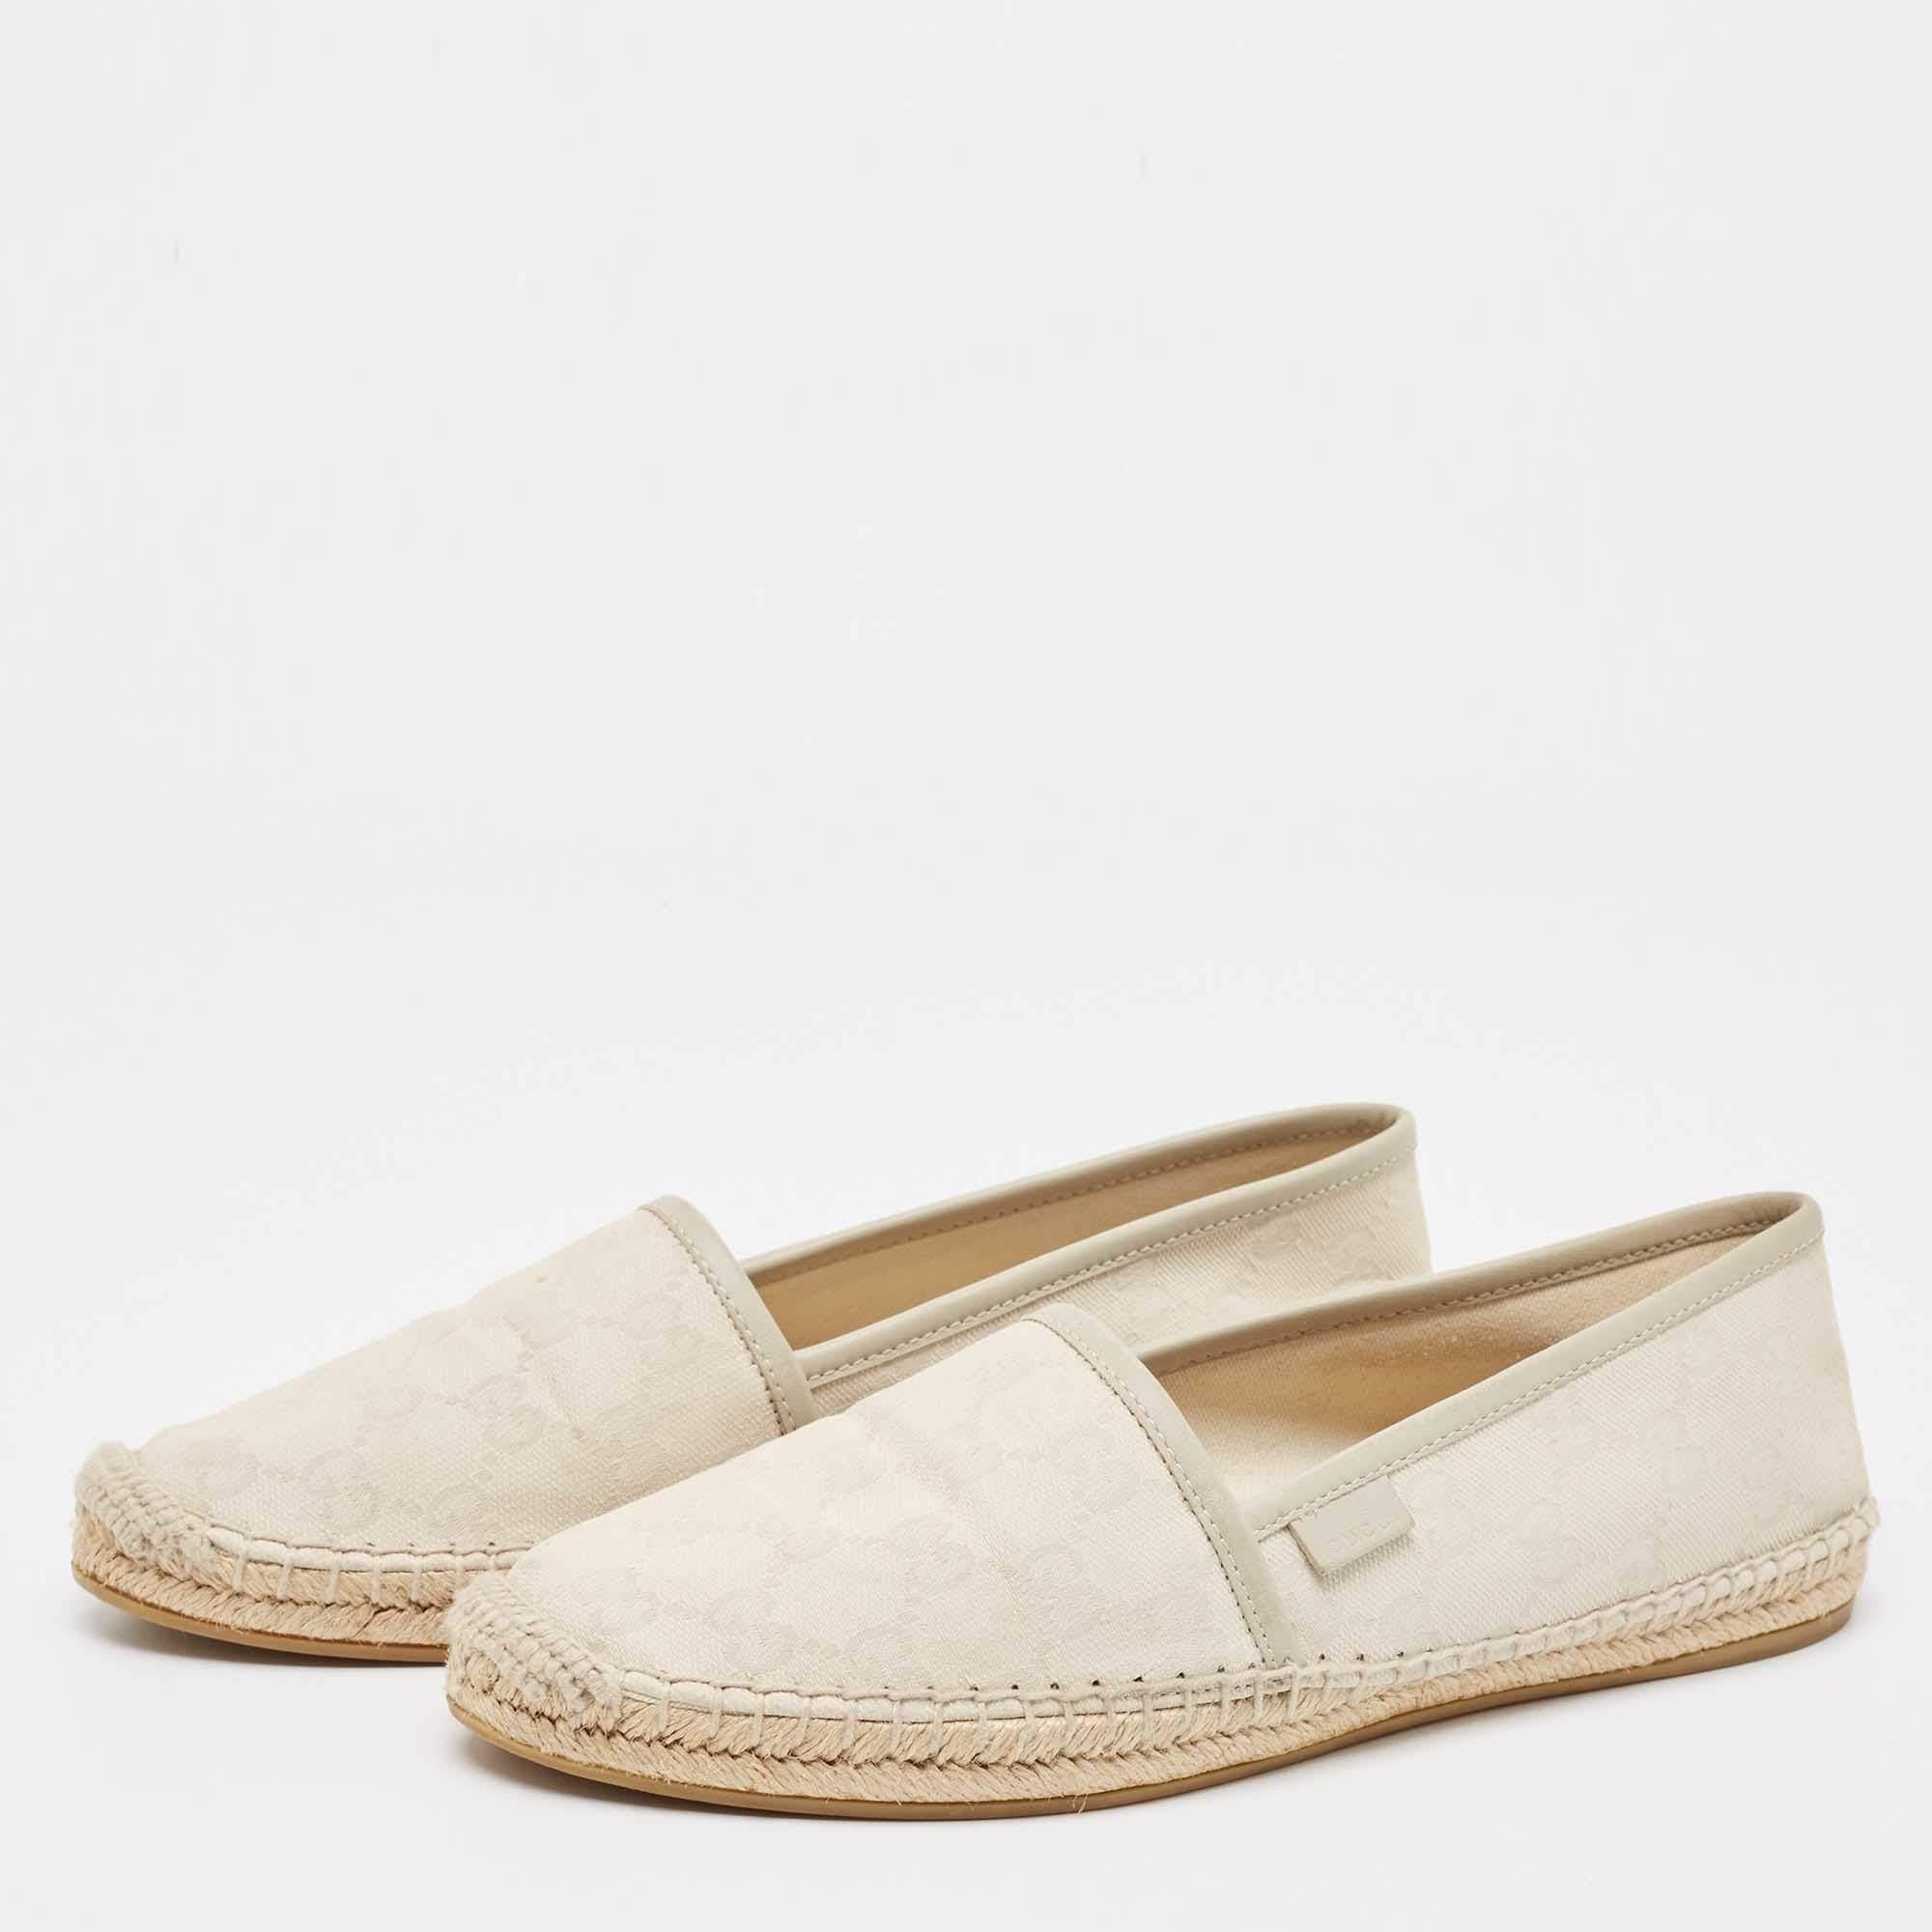 Elevate your footwear game with these Gucci espadrille flats. Combining high-end aesthetics and unmatched comfort, they are a symbol of modern luxury and impeccable taste.

